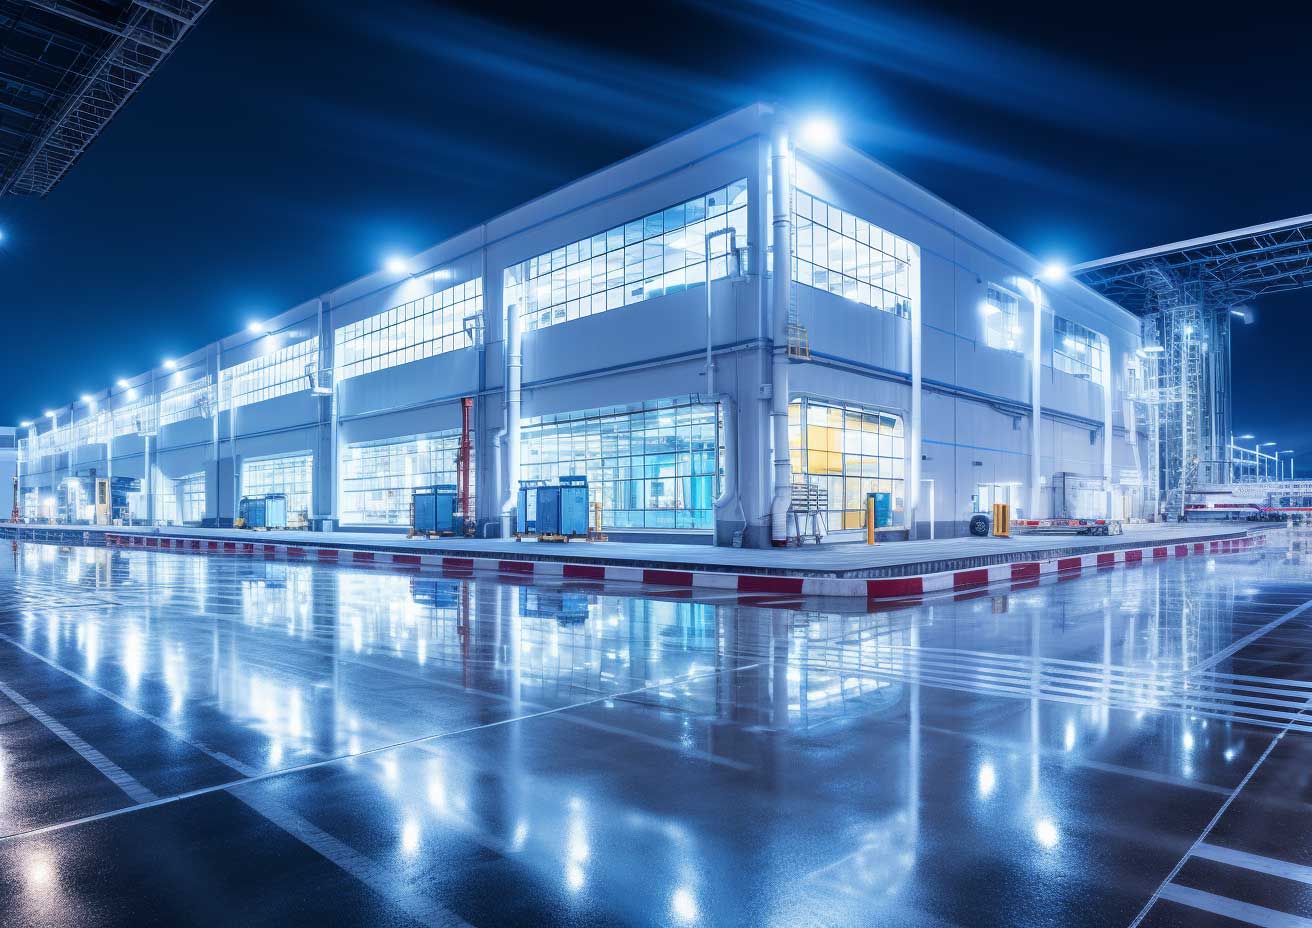 An industrial building at night with mesmerizing LED lighting reflections.